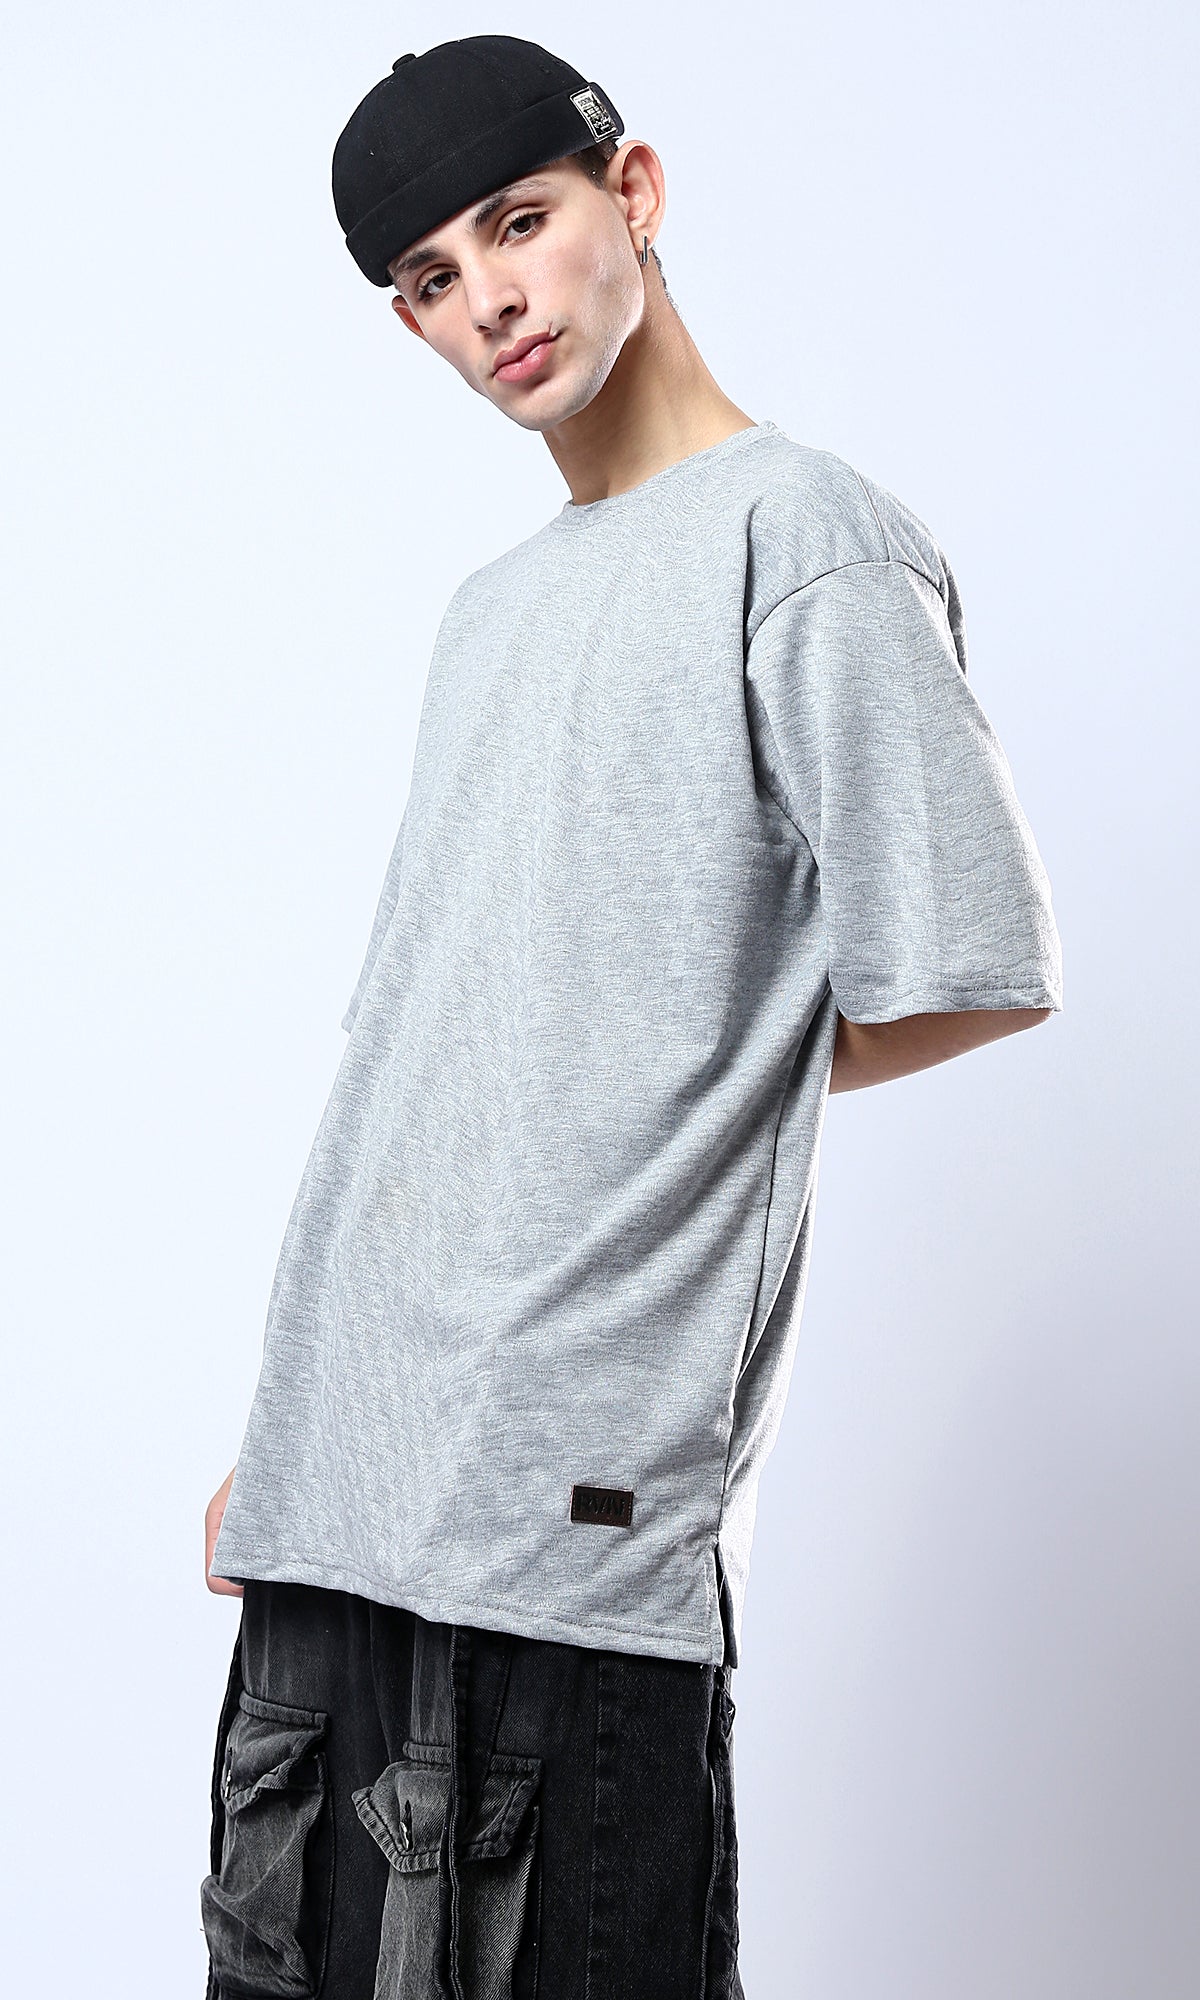 O180763 Relaxed Fit Heather Grey Comfy Slip On Tee